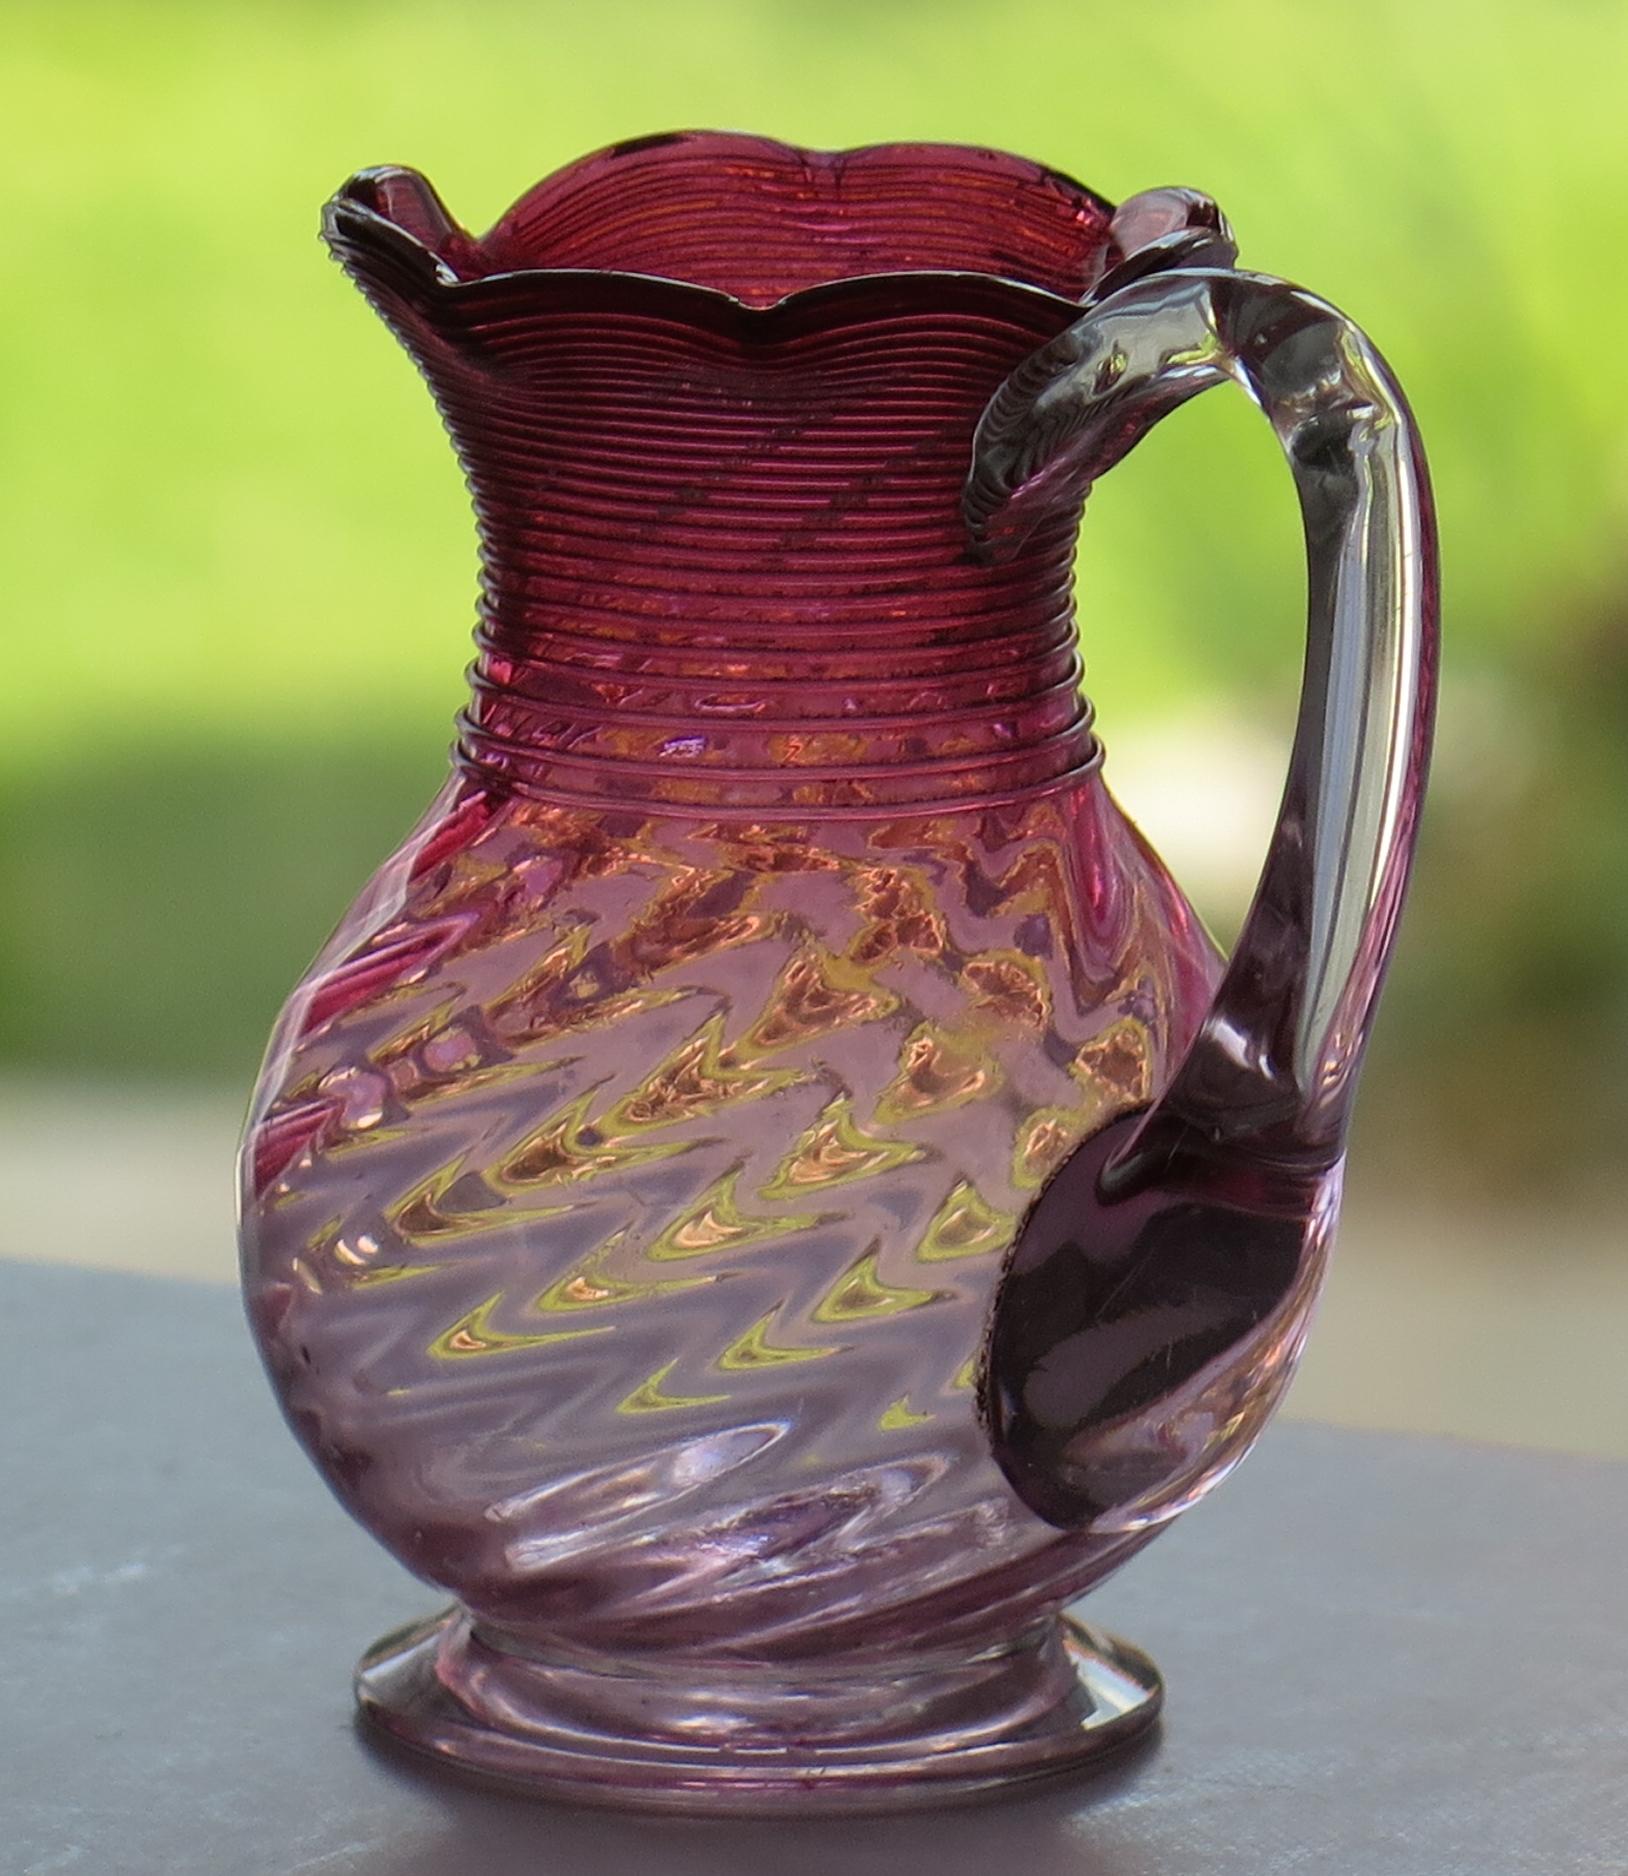 This is a good wrythen (spiral) moulded cranberry glass milk or cream jug, which we date to the mid-late 19th century of Victorian England, circa 1870.

The body is made from cranberry glass with an applied clear glass loop handle

The jug has a